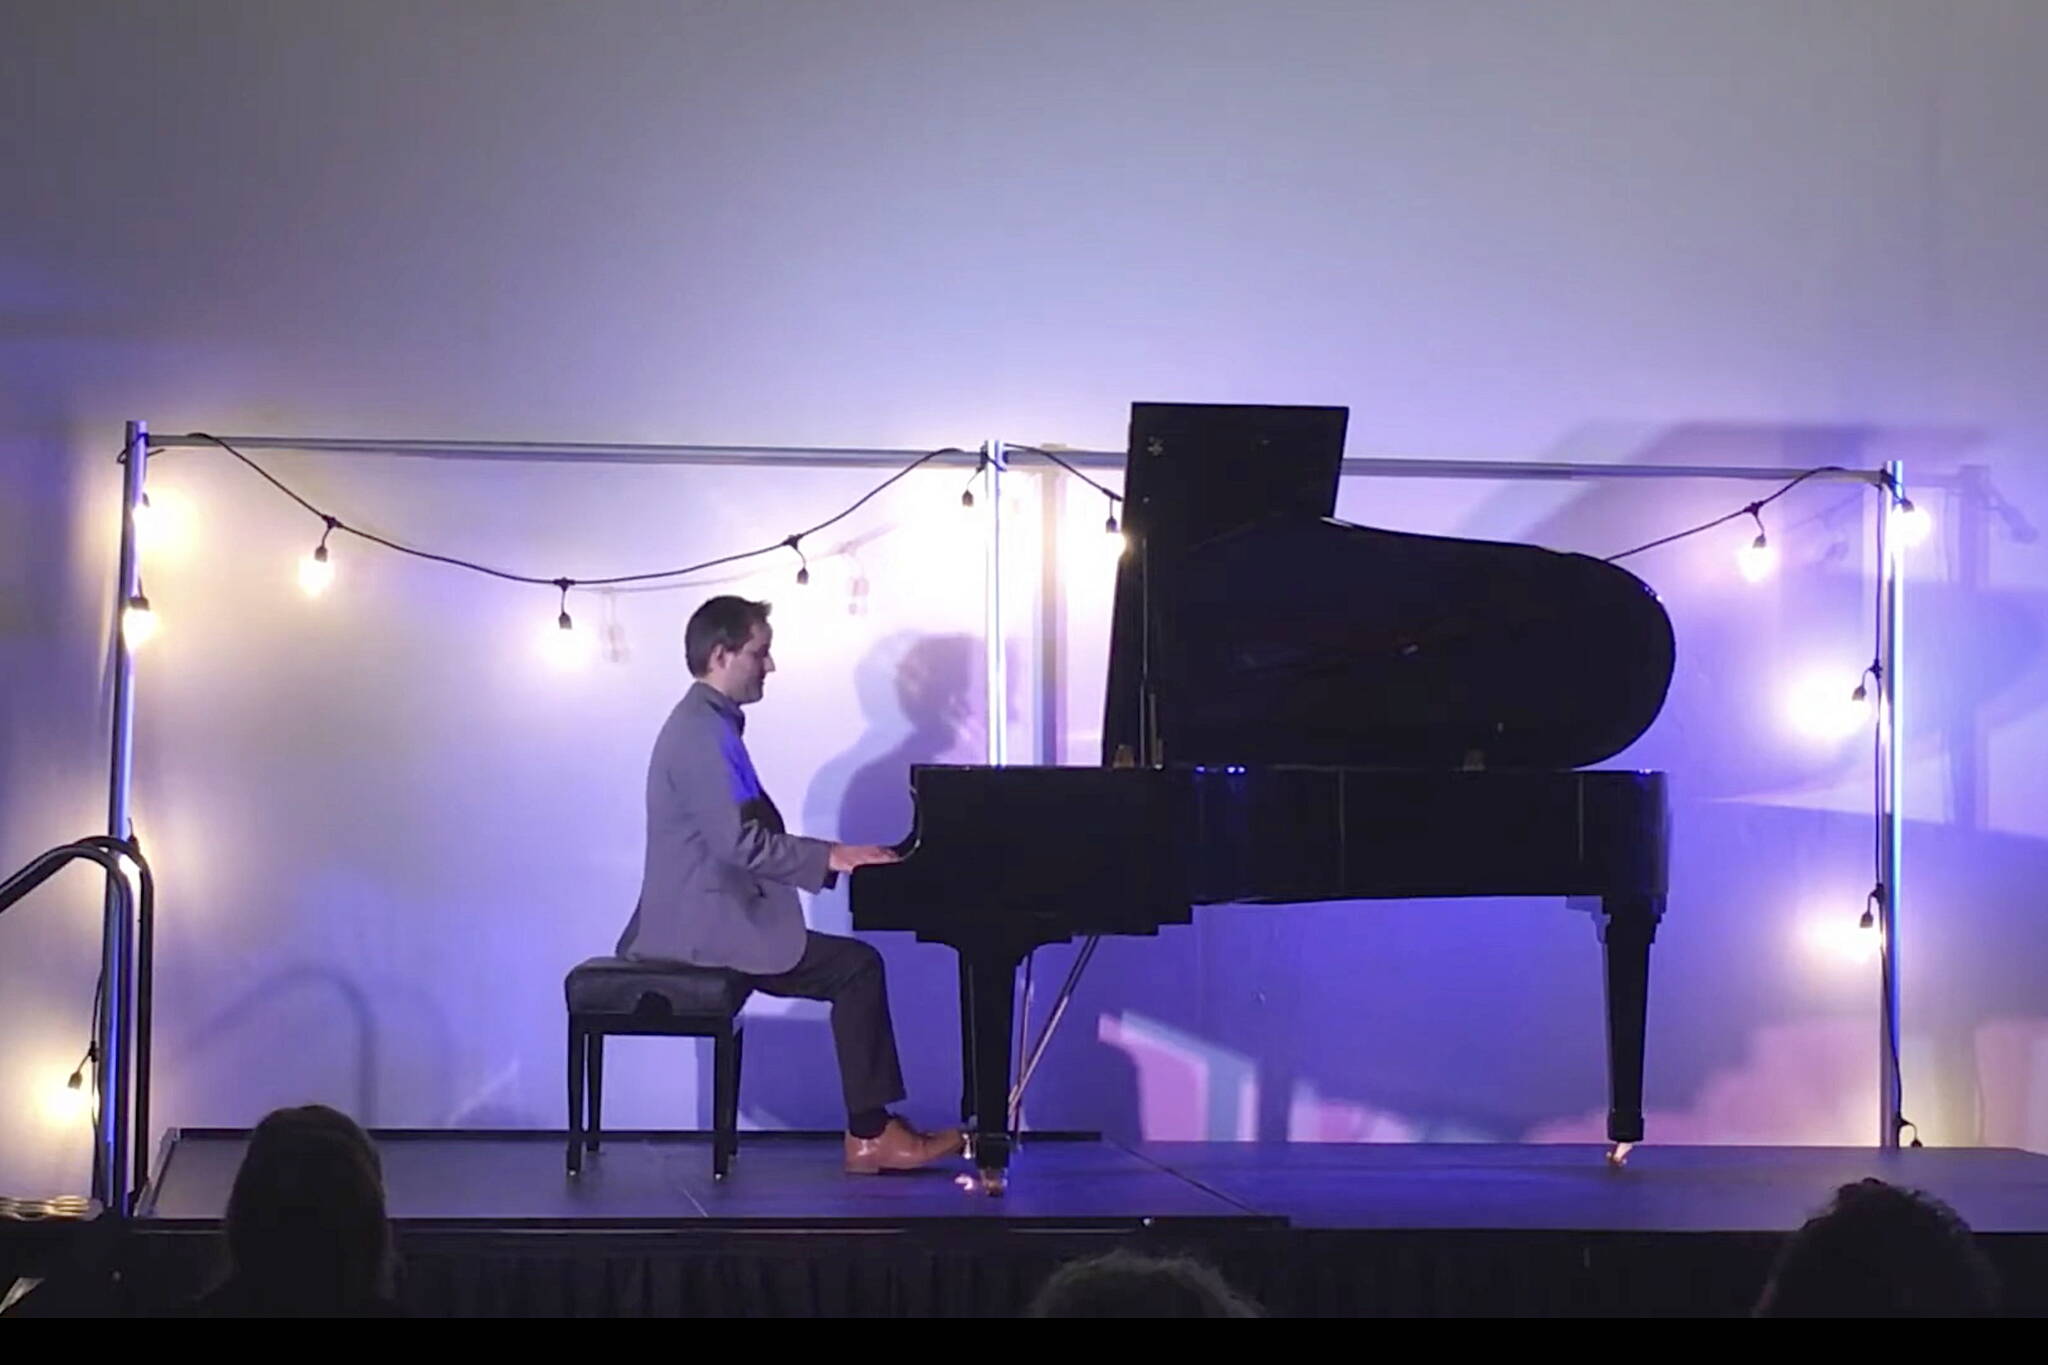 Jon Hays performs works by Beethoven during a Juneau Piano Series concert in October of 2022 at the Juneau Arts and Culture Center. Hays is scheduled to perform another concert as part of the series on March 19. (Screenshot from Juneau Piano Series video recording)